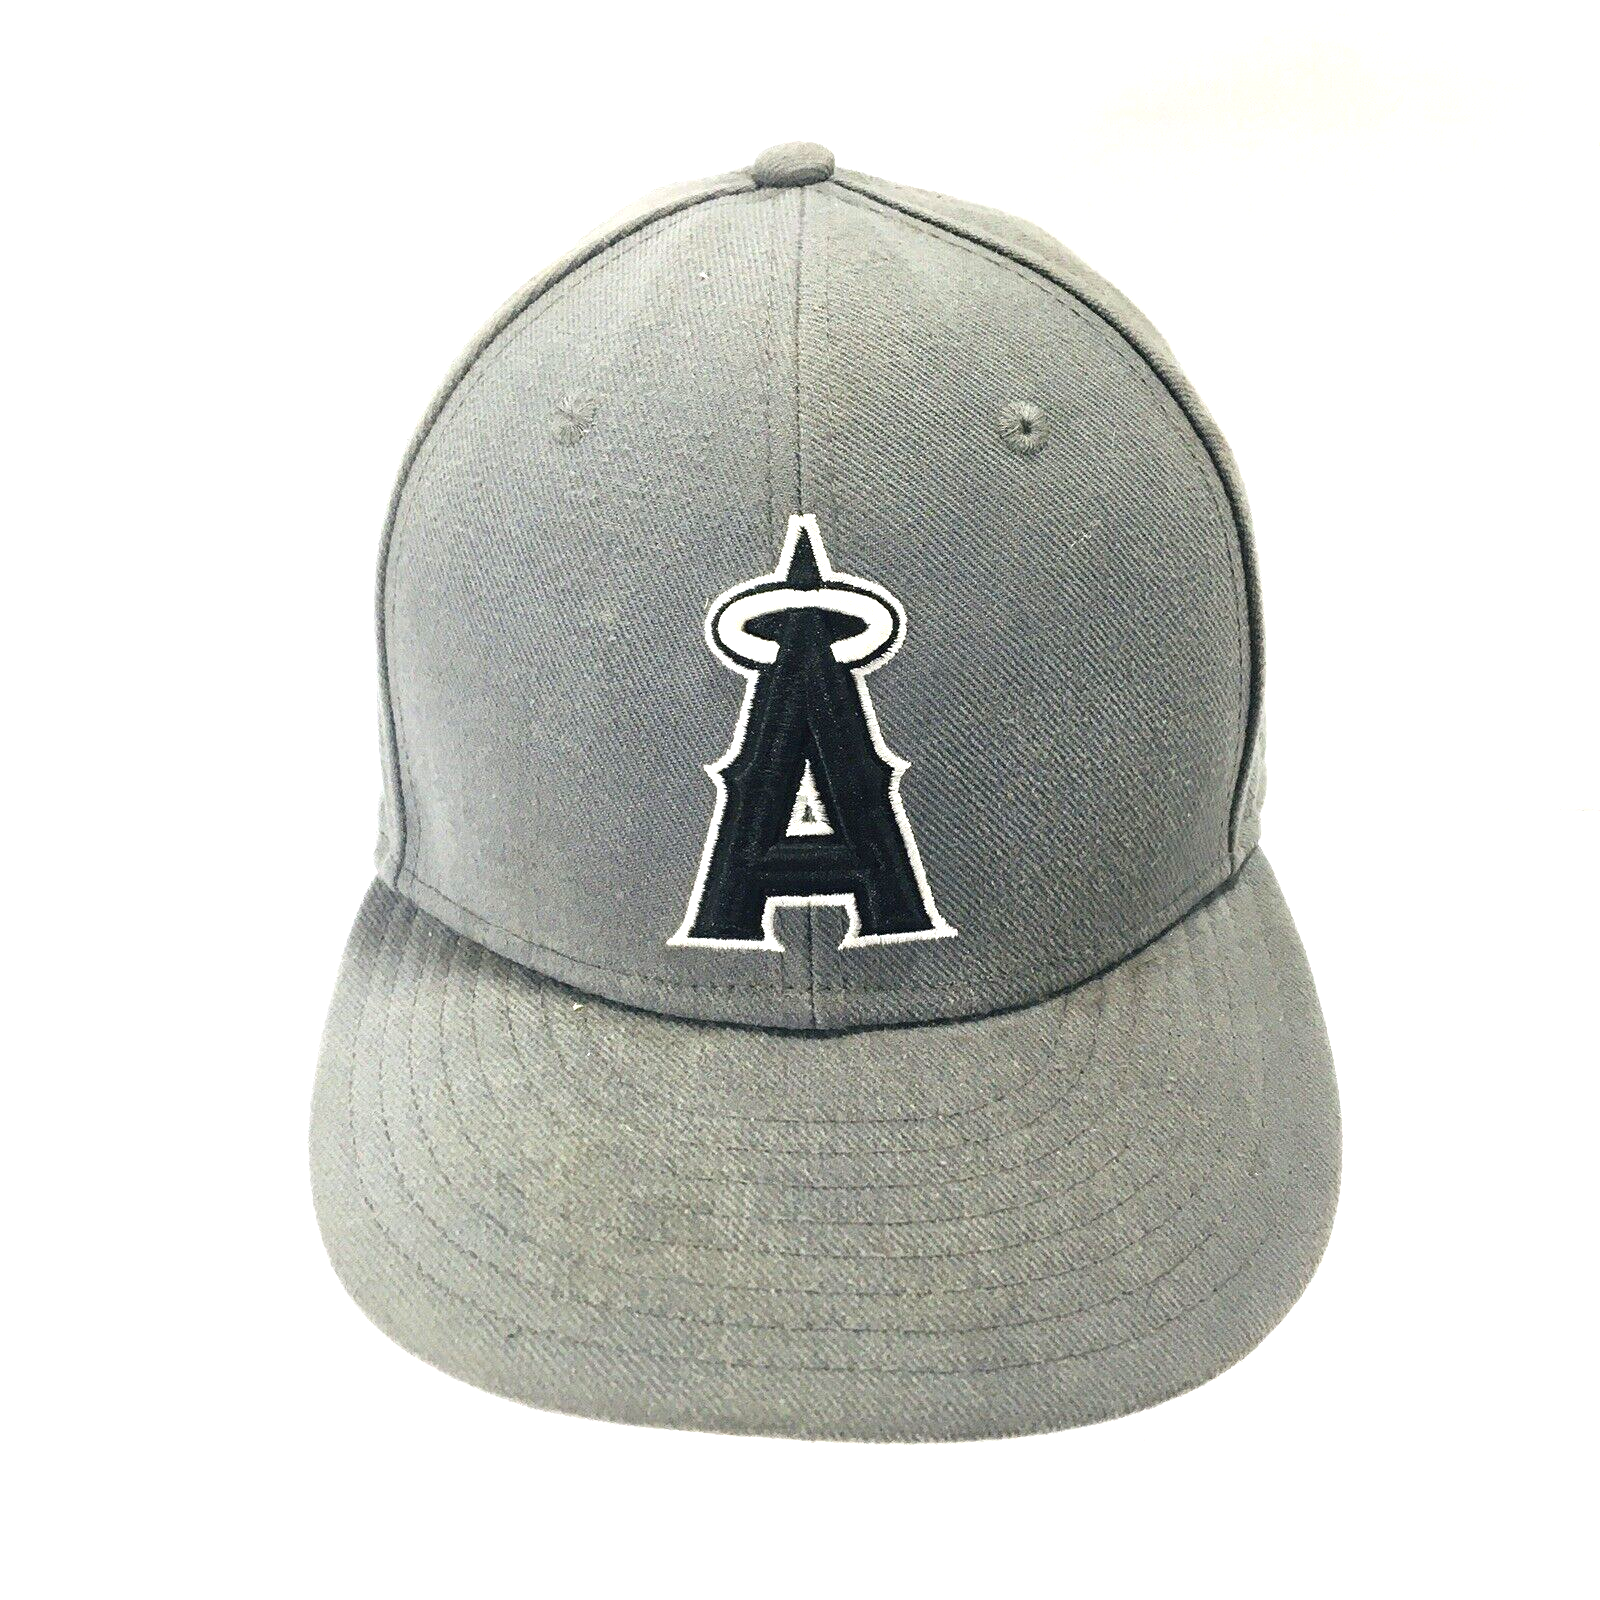 Primary image for Angels Genuine Merchandise MLB Hat Cap Pre-Owned Size 7 1/2 Fitted New Era 59 50